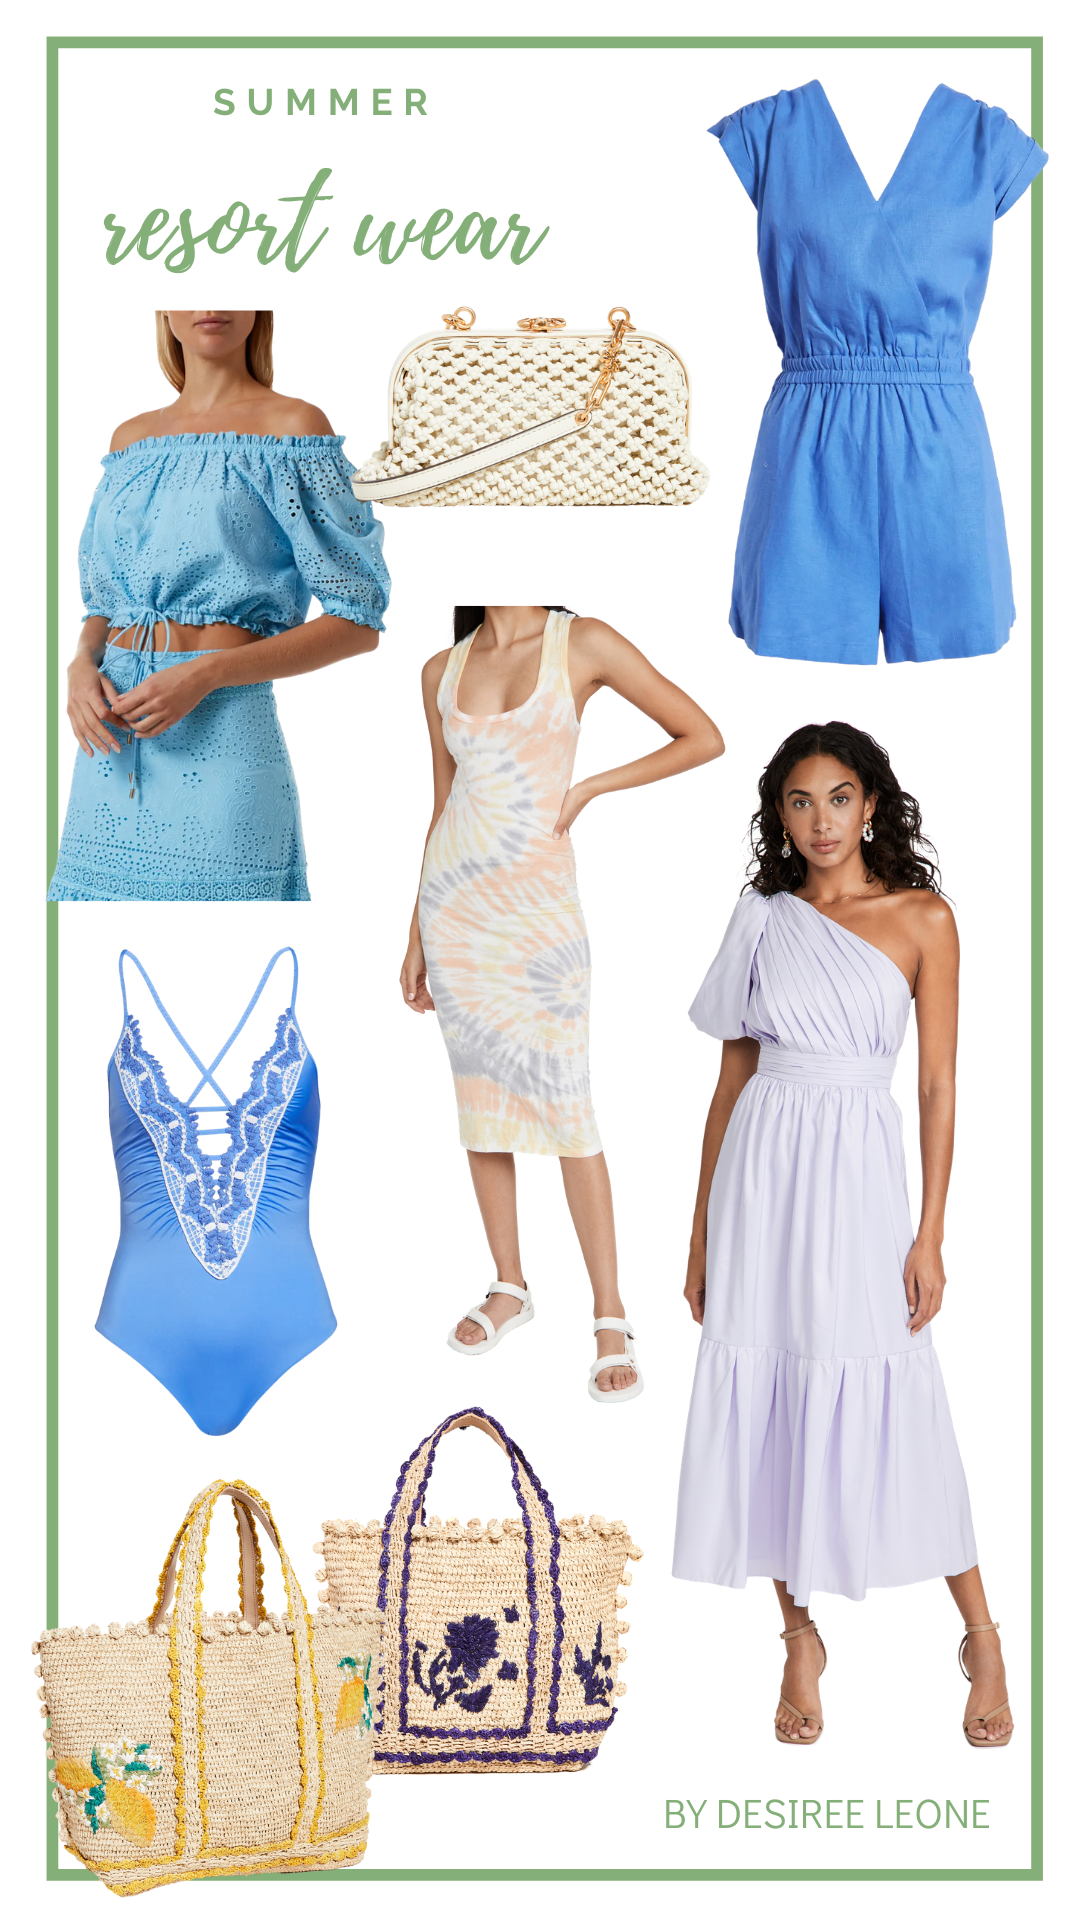 NEW STYLES IN THE RESORT SHOP - Beautifully Seaside